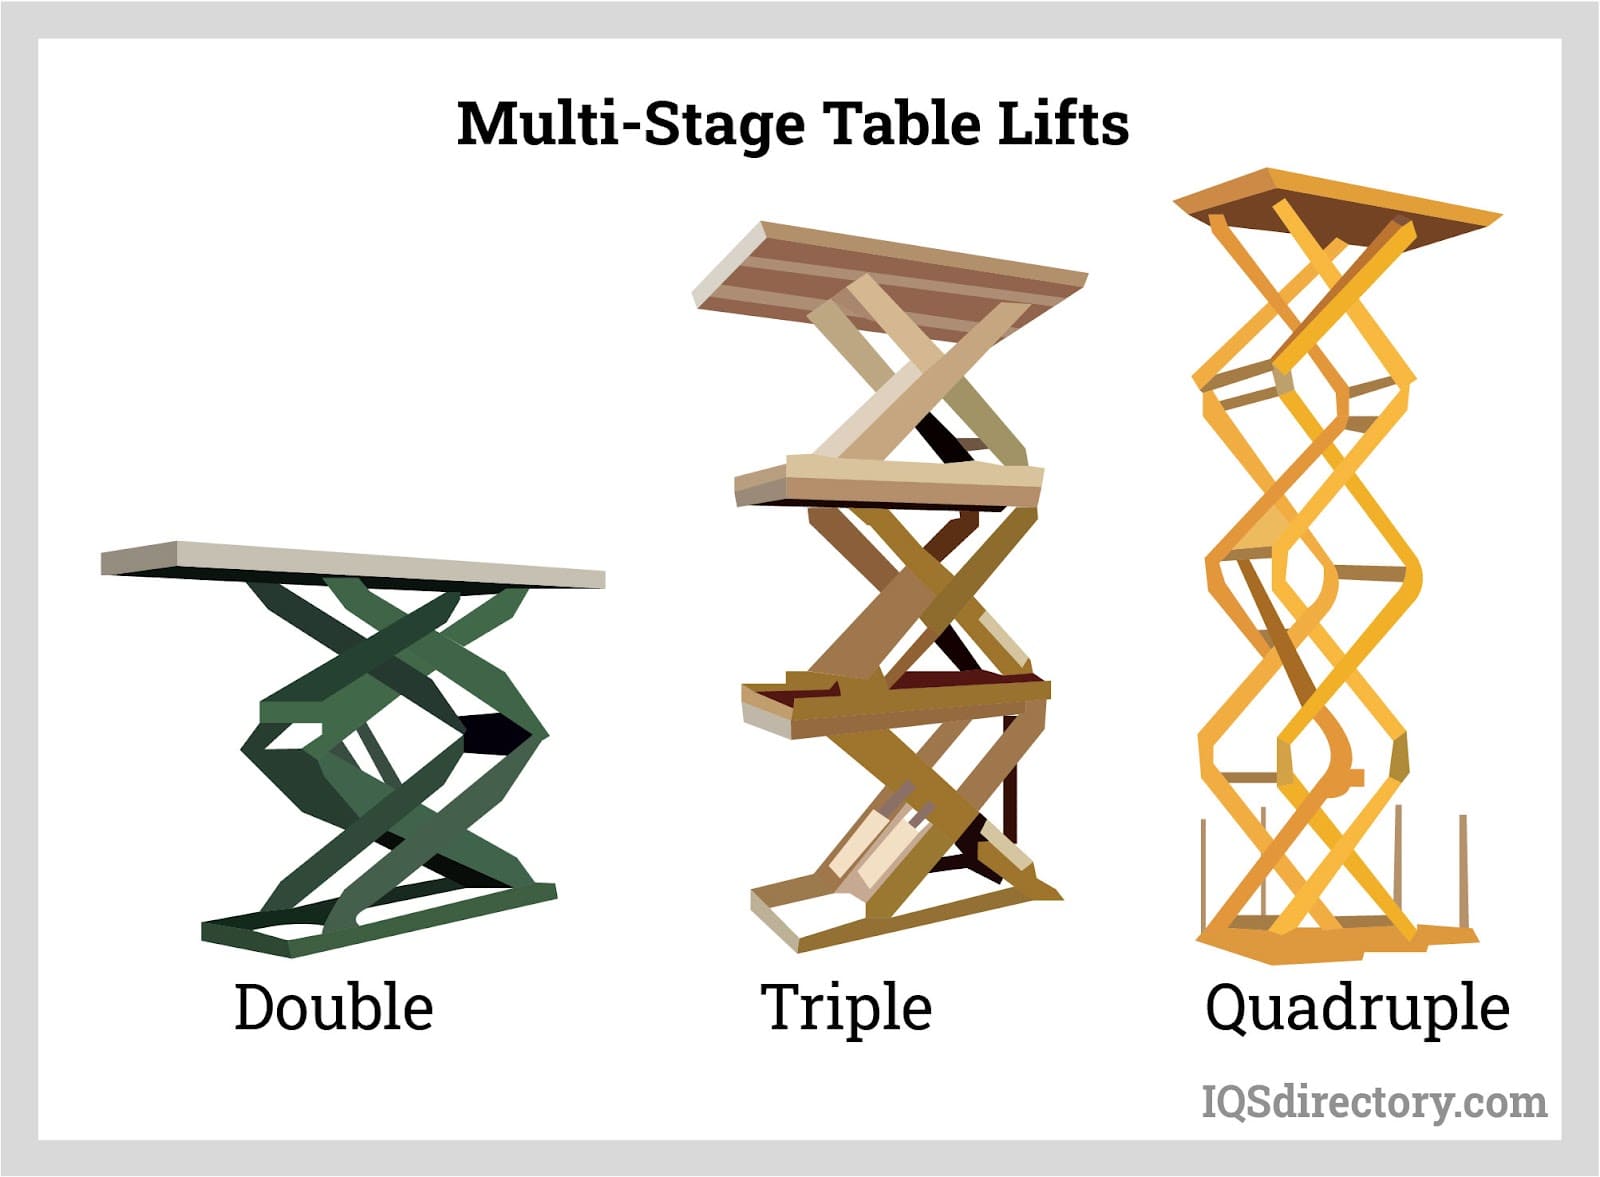 multi-stage table lifts